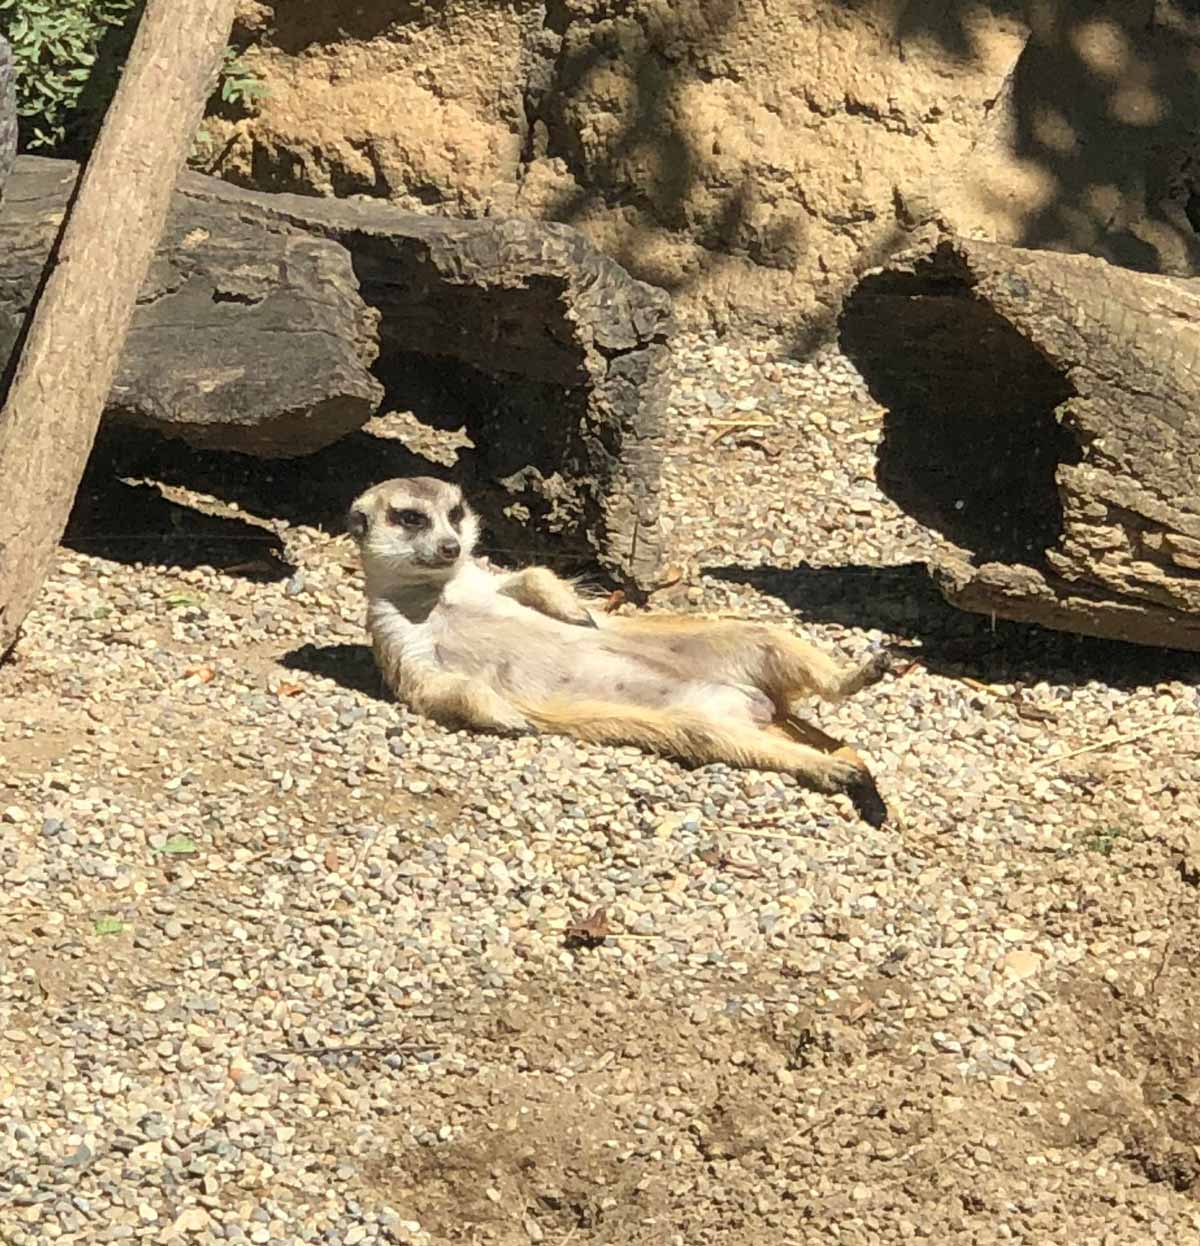 Paint me like one of your French girls